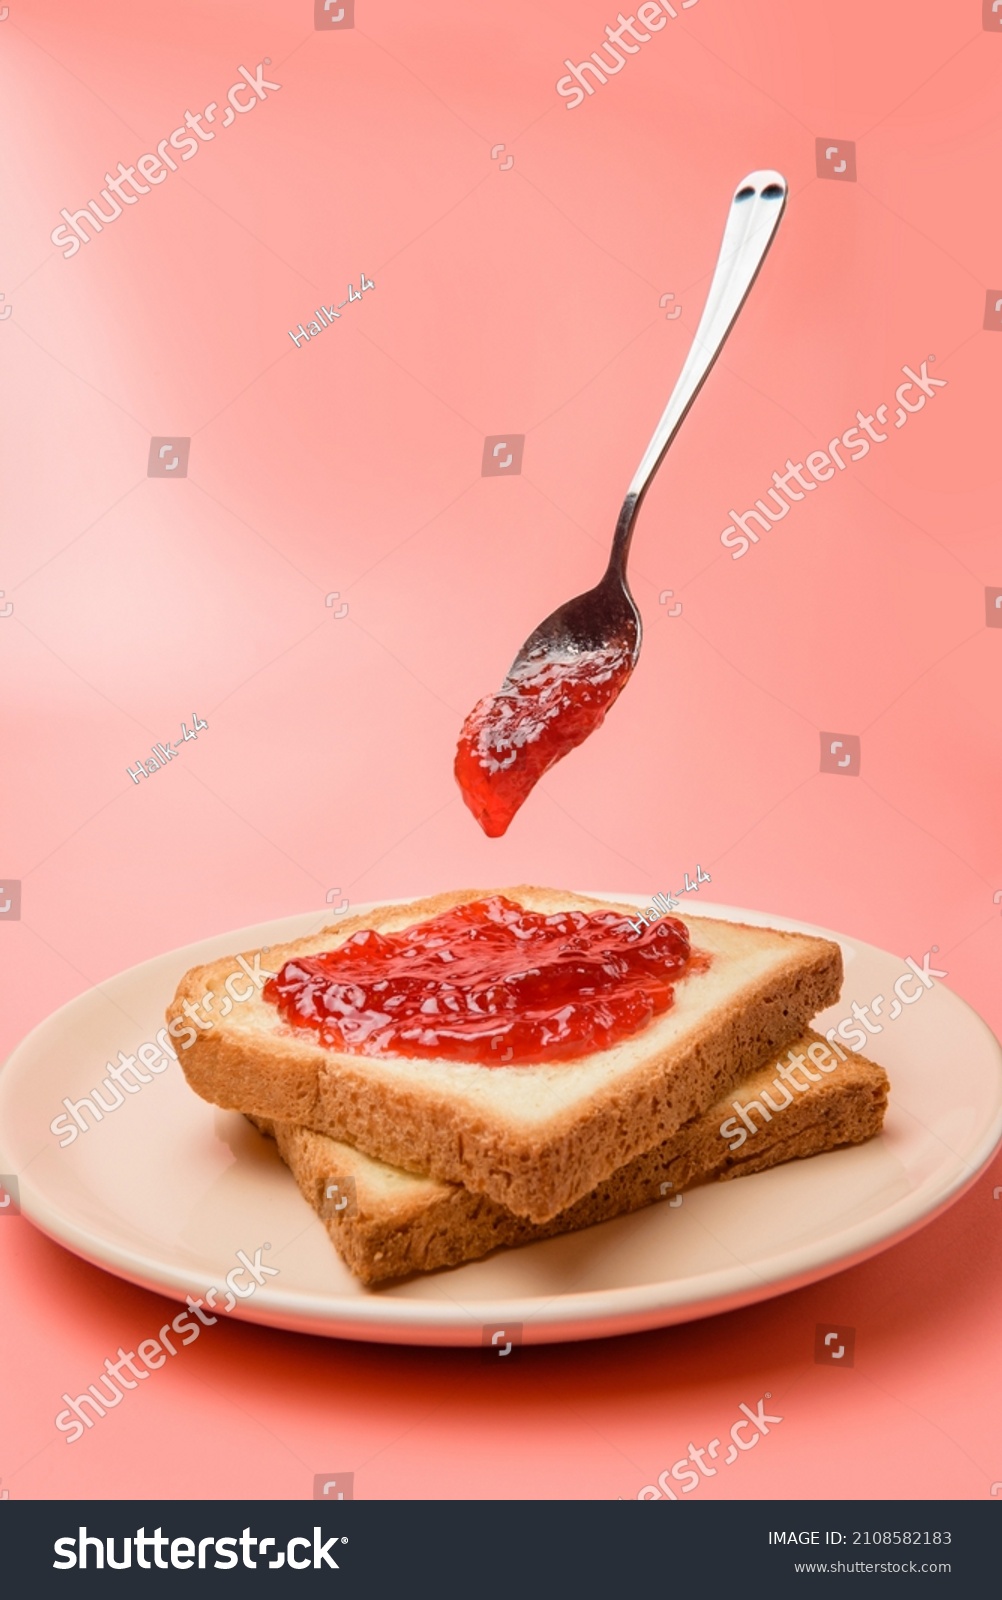 a dish of toast spread with jam and a levitating spoon against a pastel pink background. #2108582183